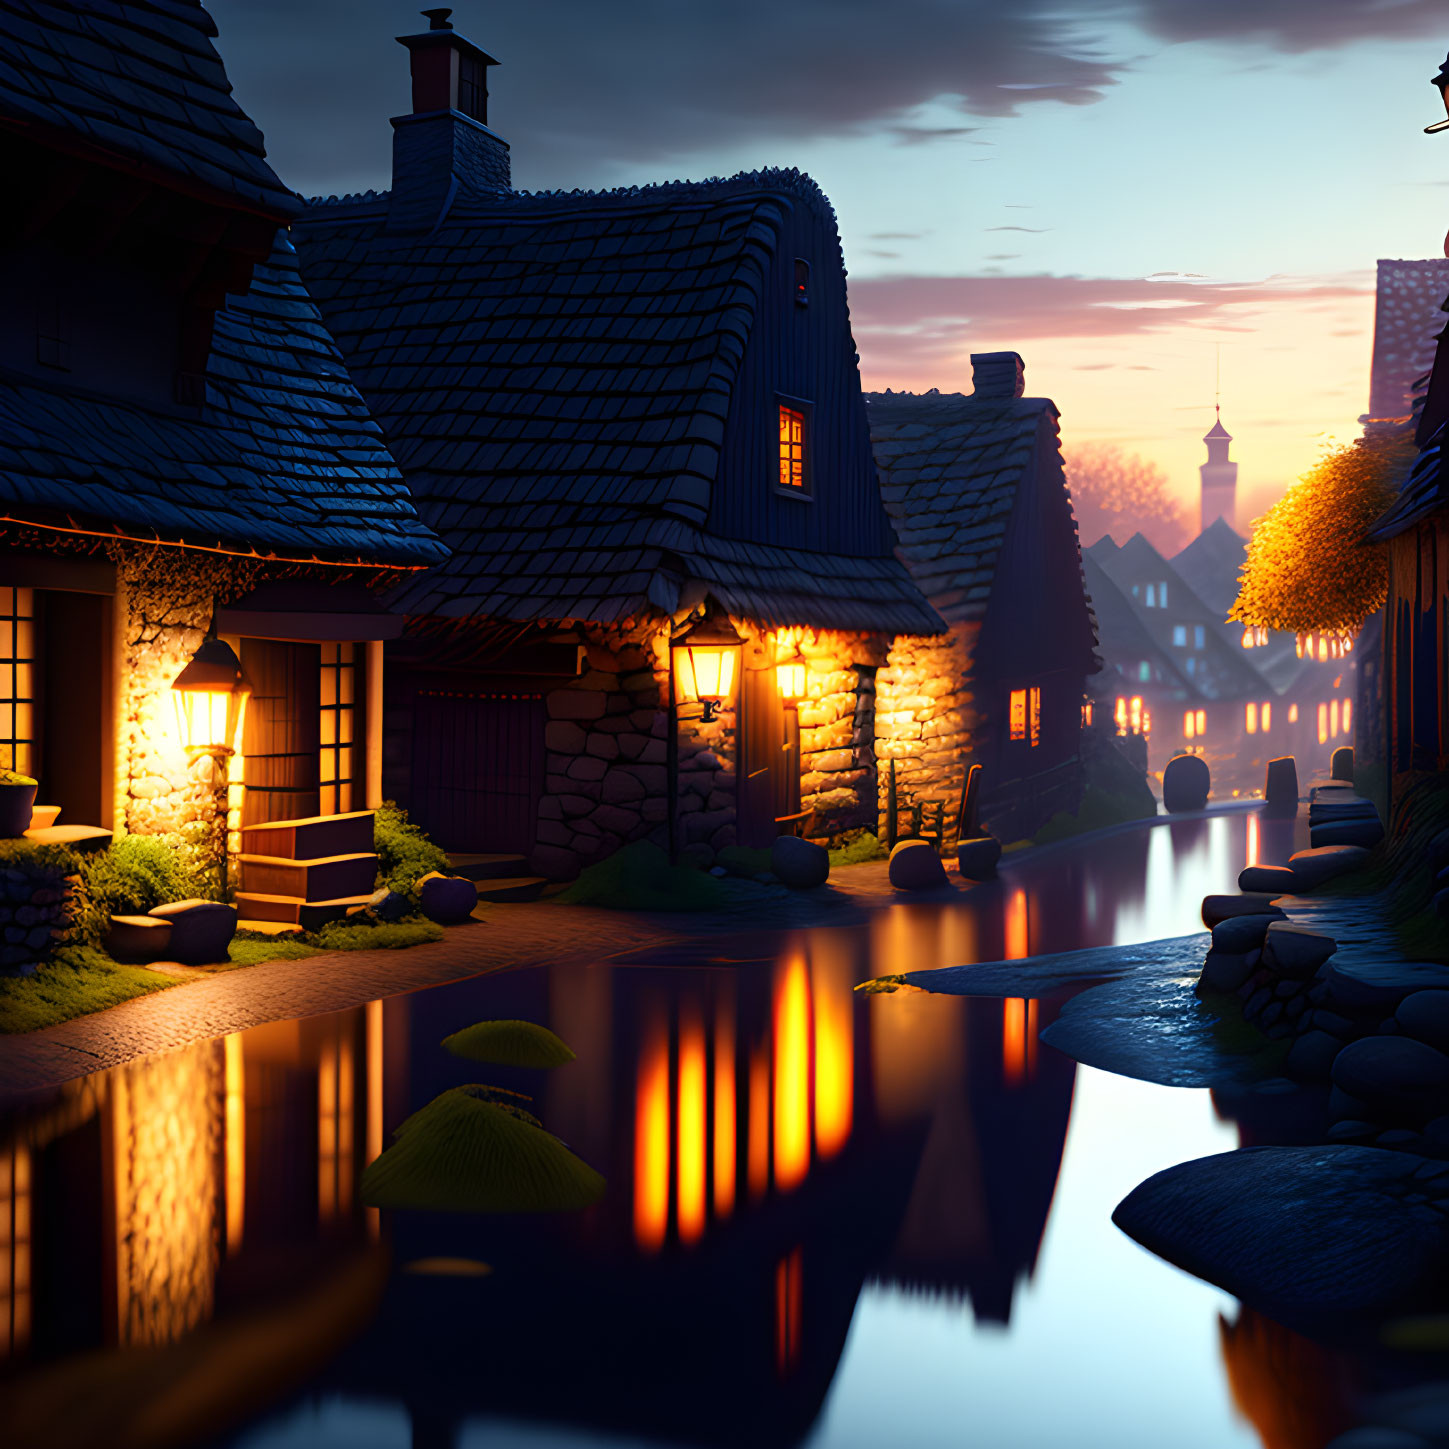 Picturesque cobblestone village at dusk with illuminated houses by a serene canal under twilight sky